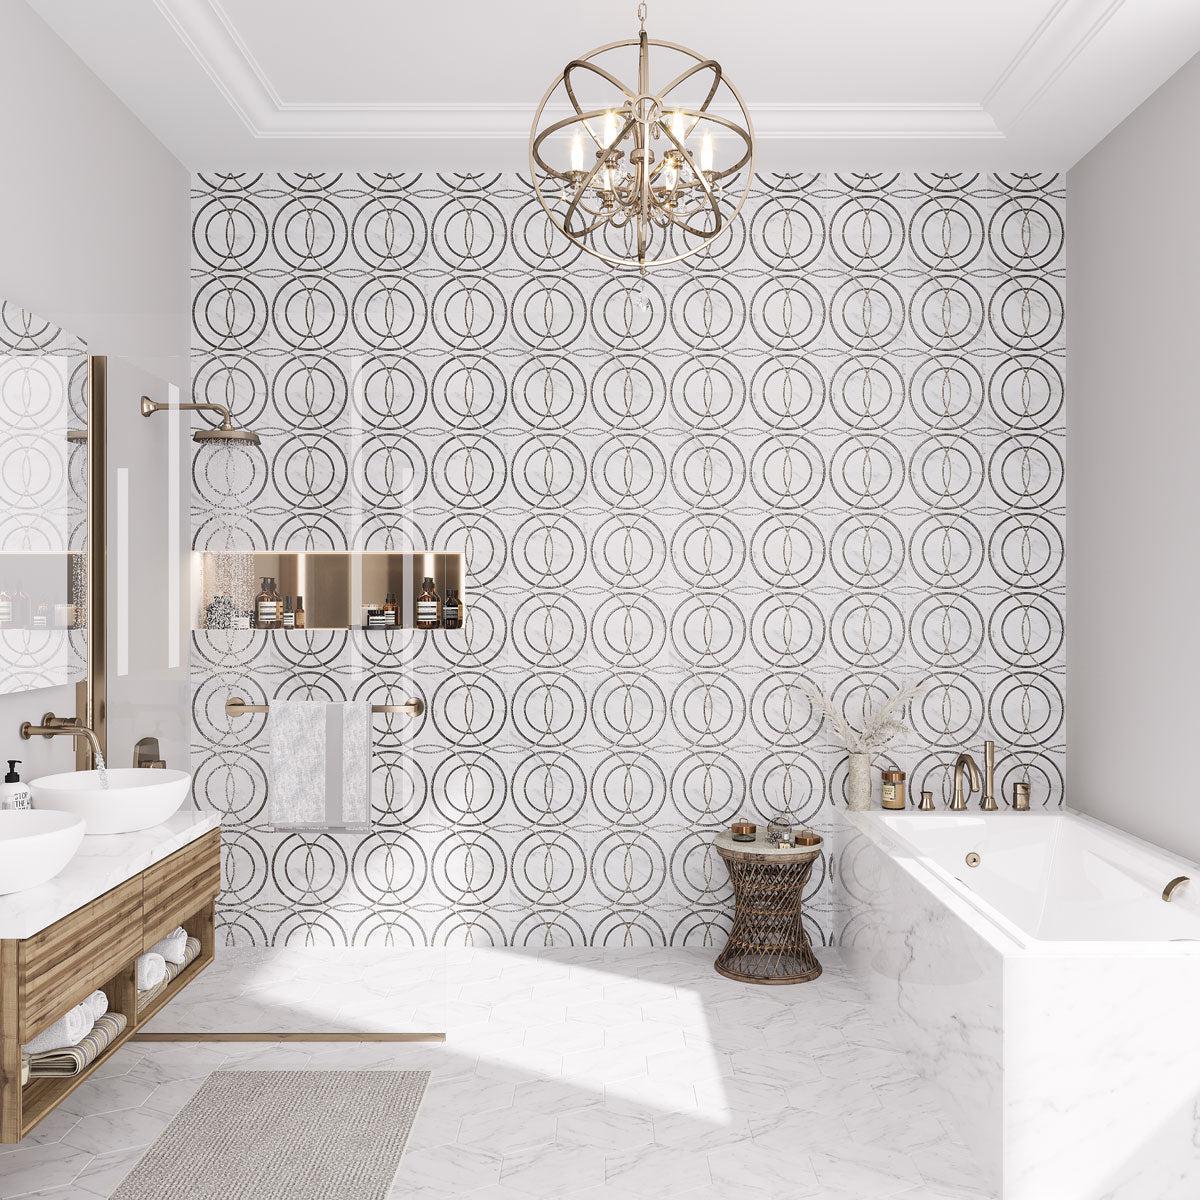 Luxurious bathroom with a statement wall of circular waterjet tiles